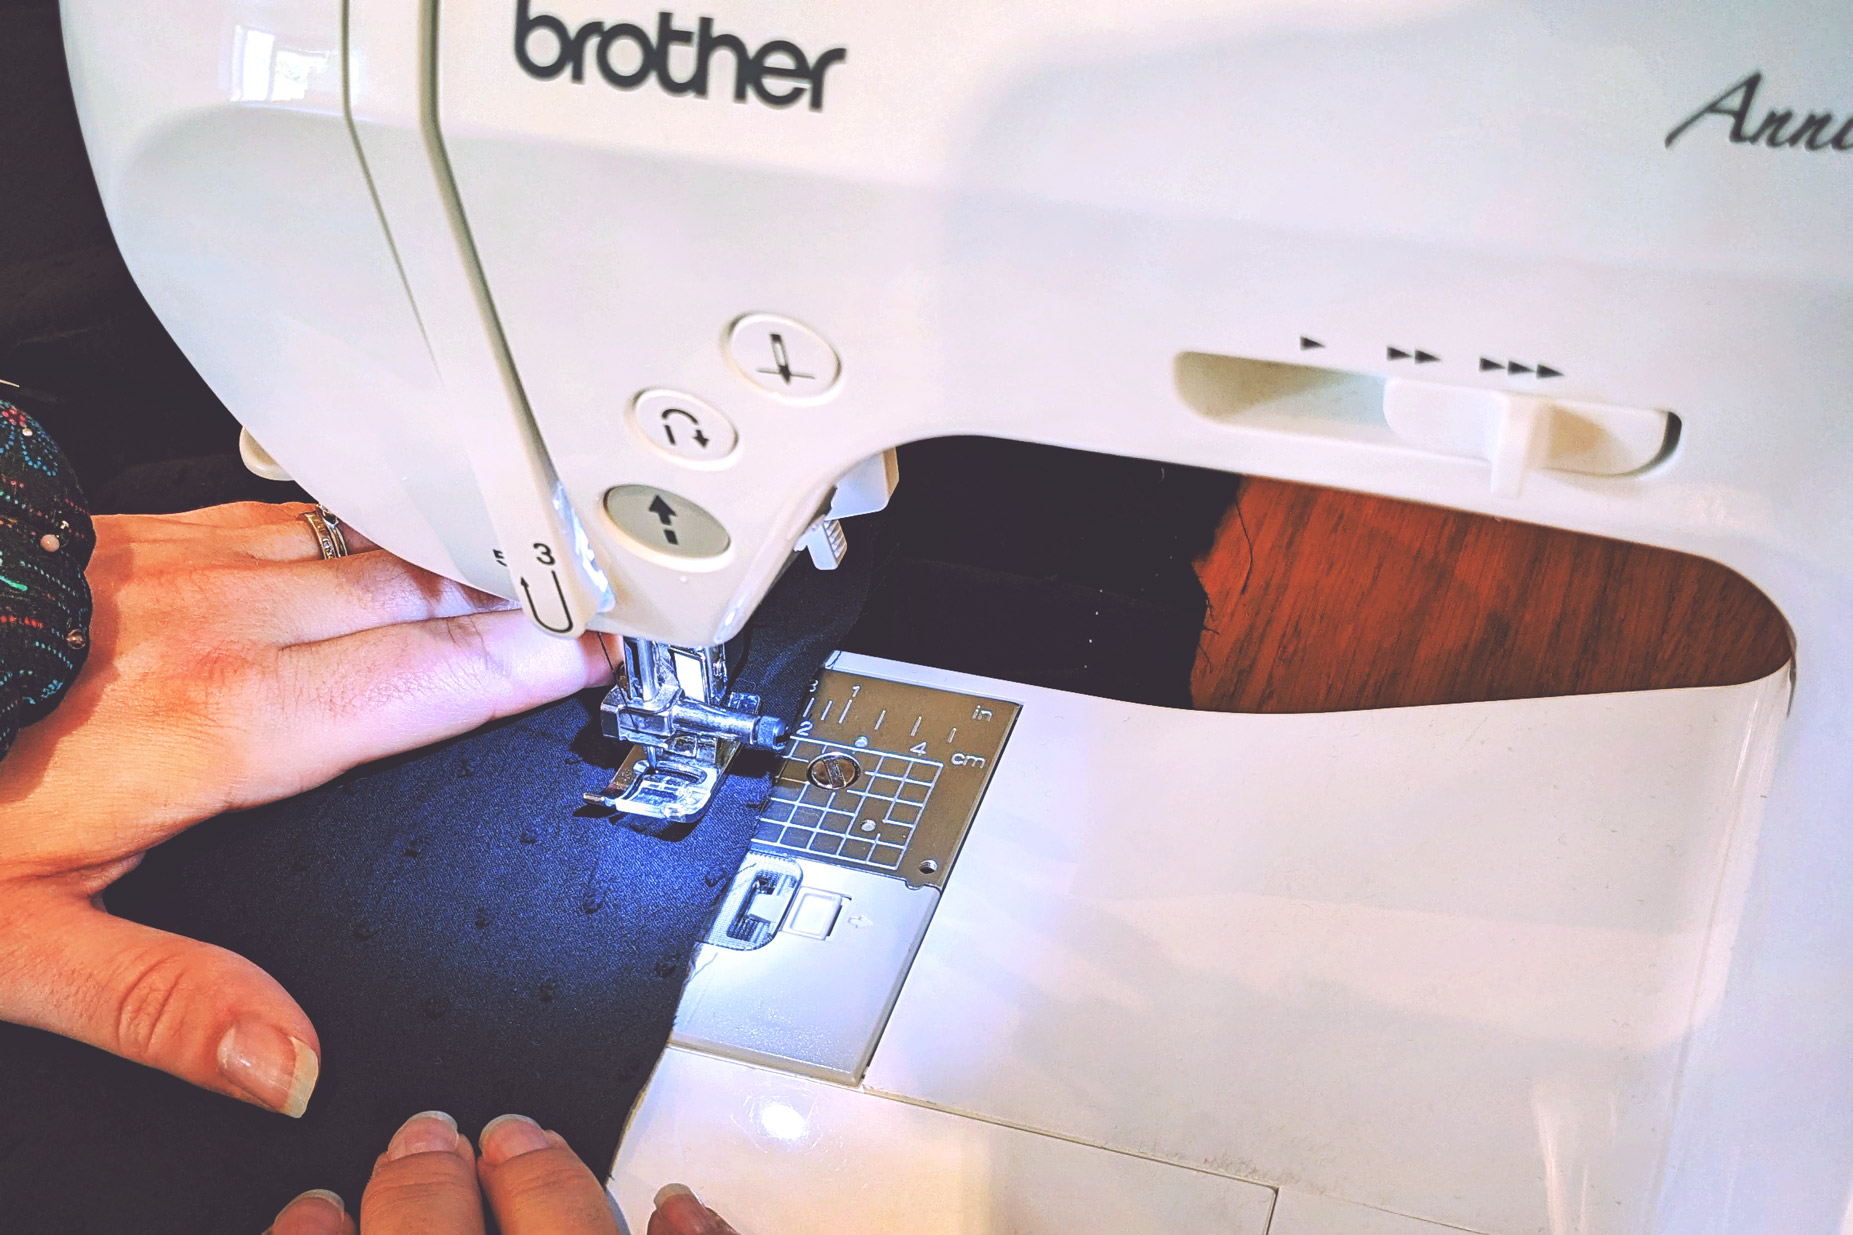 Sewing Machine in action